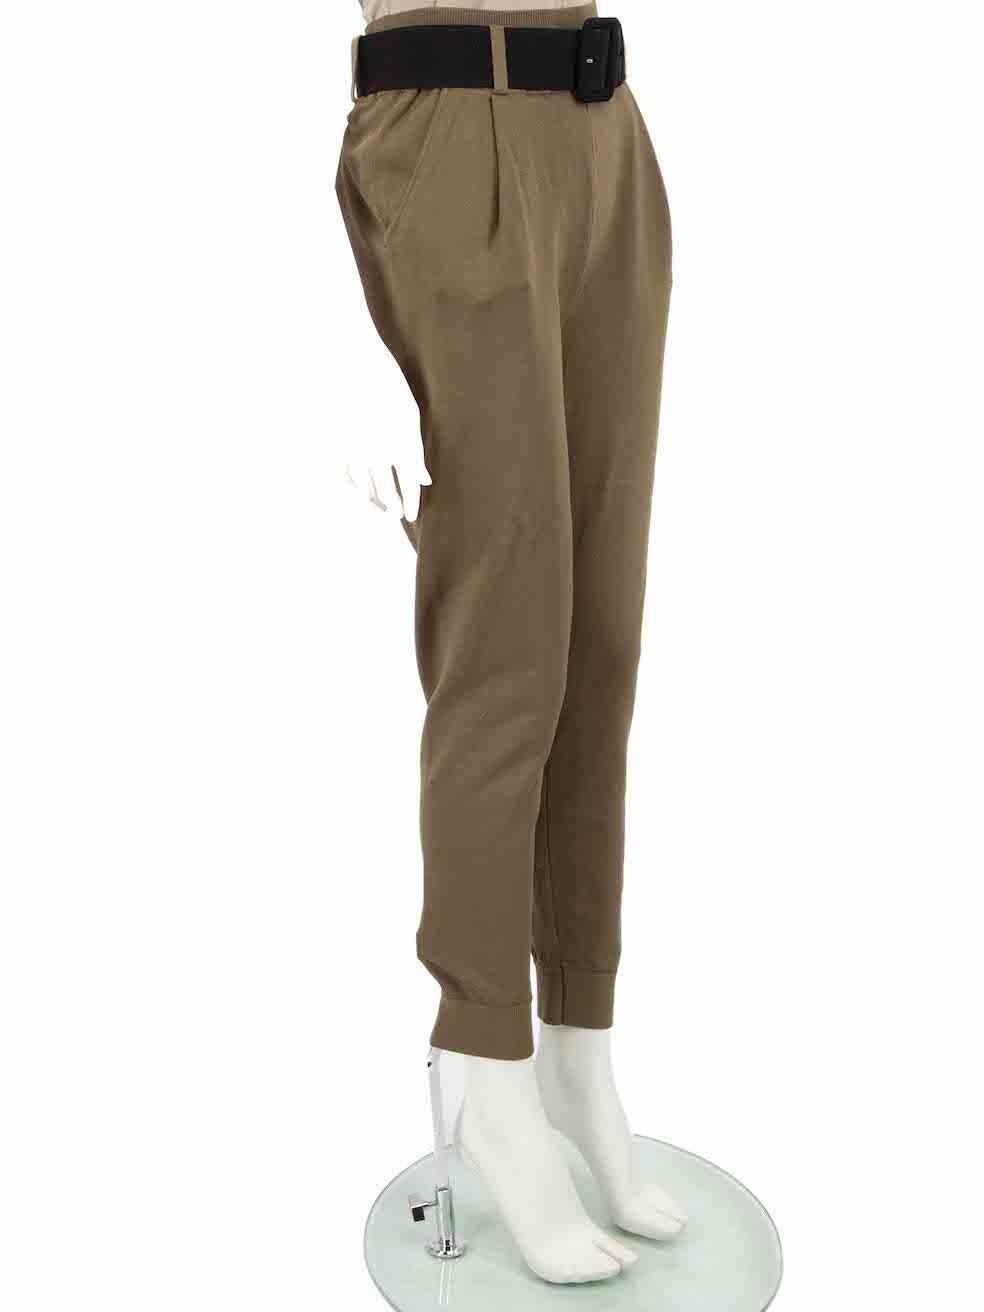 CONDITION is Very good. Minimal wear to trousers is evident. There are small plucks to the weave near the front knee area on this used Self-Portrait designer resale item.
 
 Details
 Khaki
 Viscose
 Trousers
 Tapered fit
 Stretchy
 Belted
